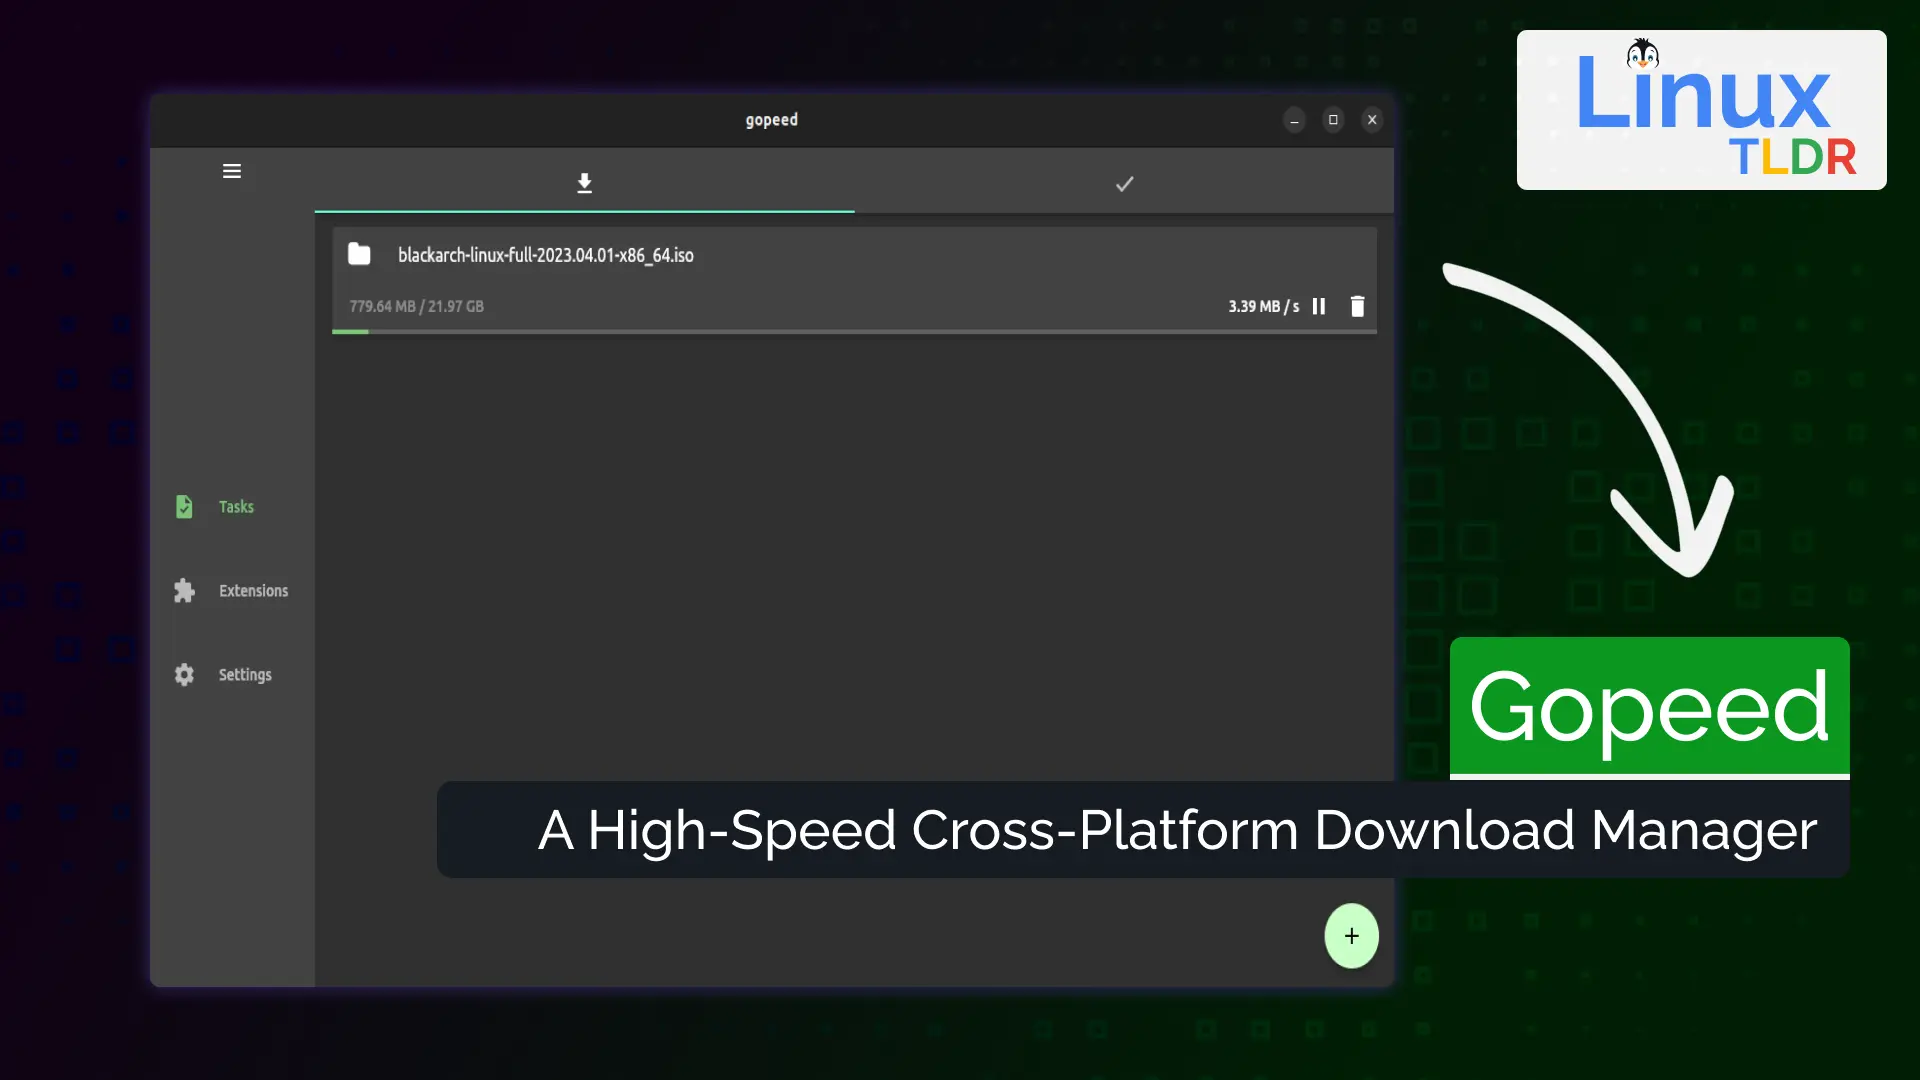 QnA VBage Gopeed: A High-Speed Cross-Platform Download Manager